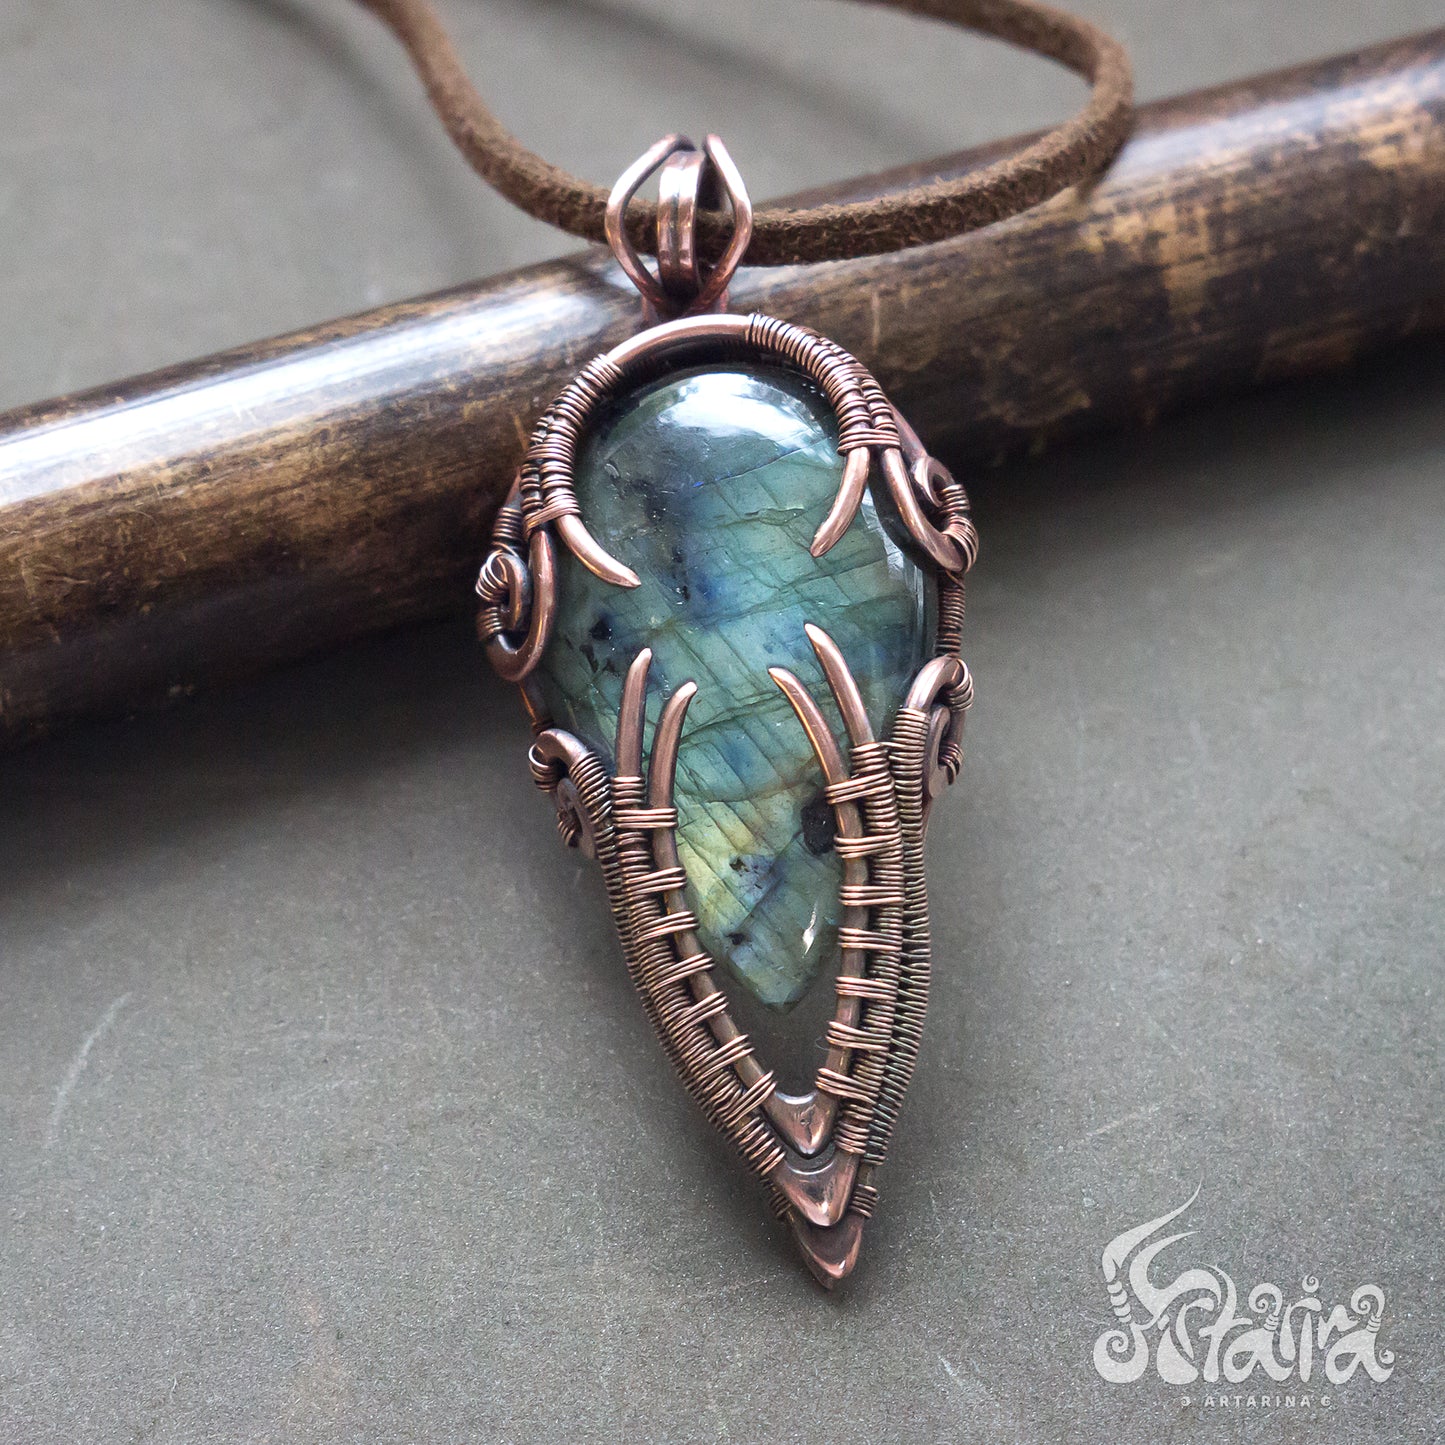 Wire wrapped necklace with stone. Copper wirewrap pendent Natural labradorite stone wirework handcrafted necklace Mens pendant Pagan wirework jewelry necklace handmade handcrafted antiqued copper jewelry piece with multicolored labradorite stone